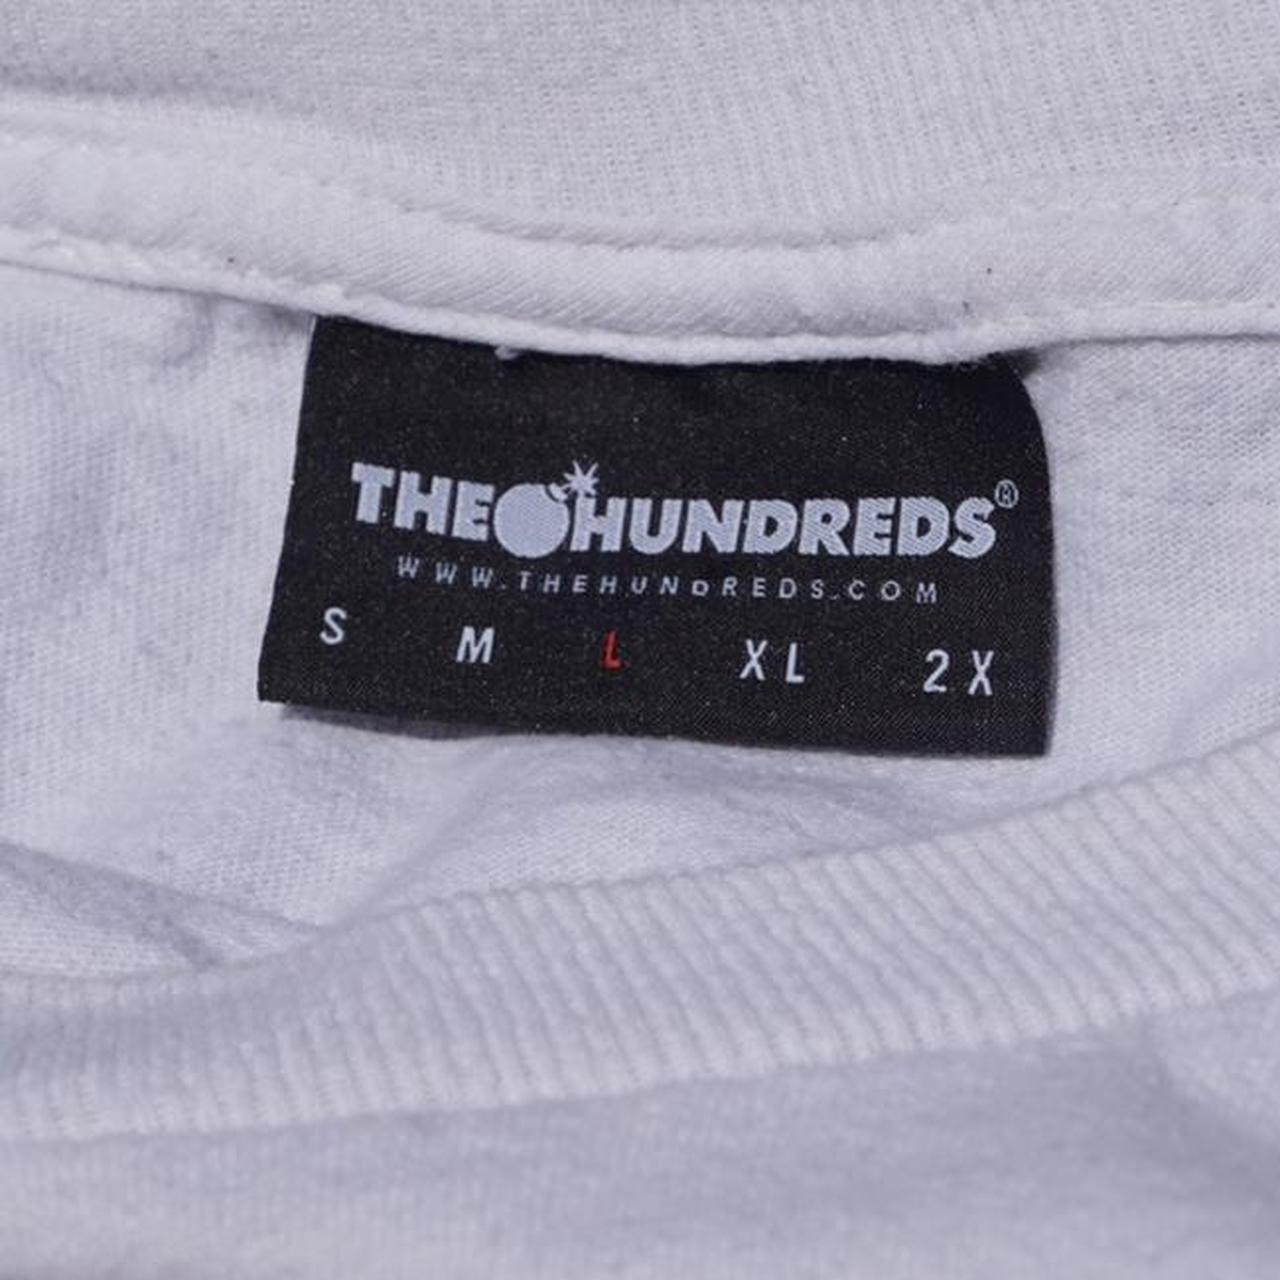 Product Image 4 - The Hundreds Tee

Embroidered Classic Bomb